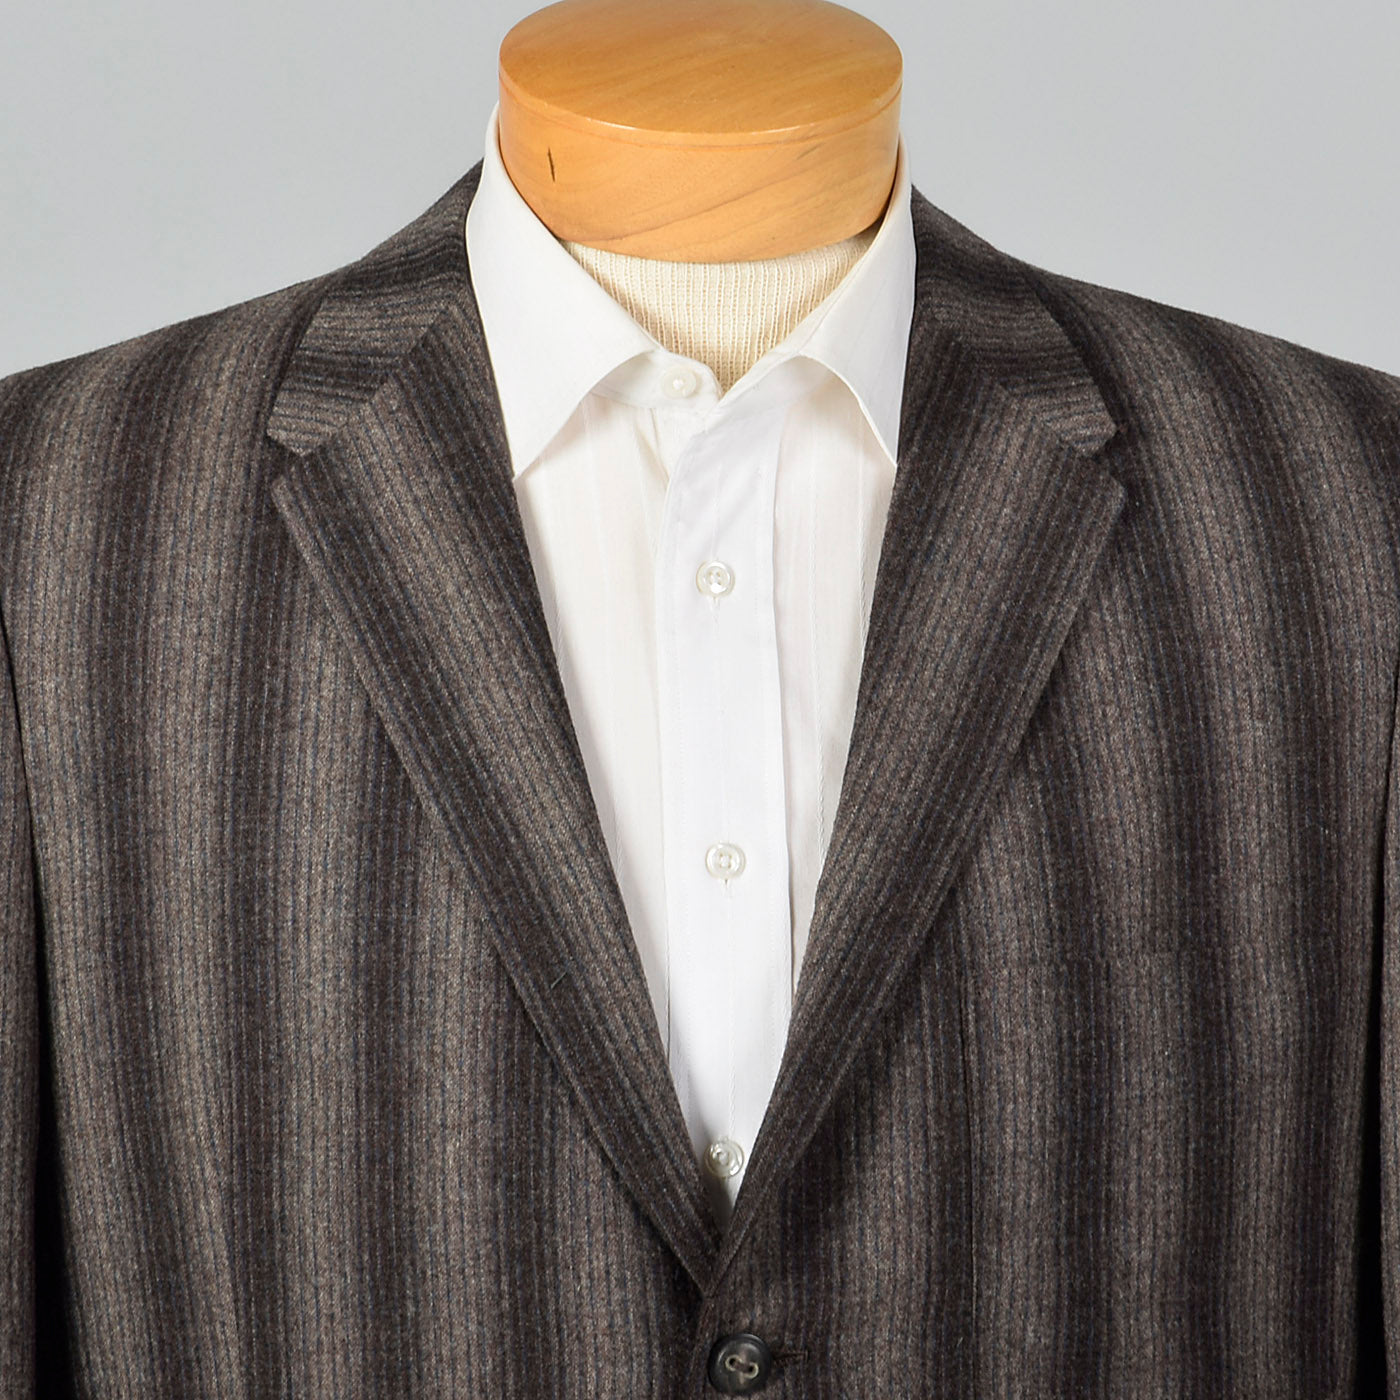 1950s Mens Gray and Charcoal Stripe Jacket